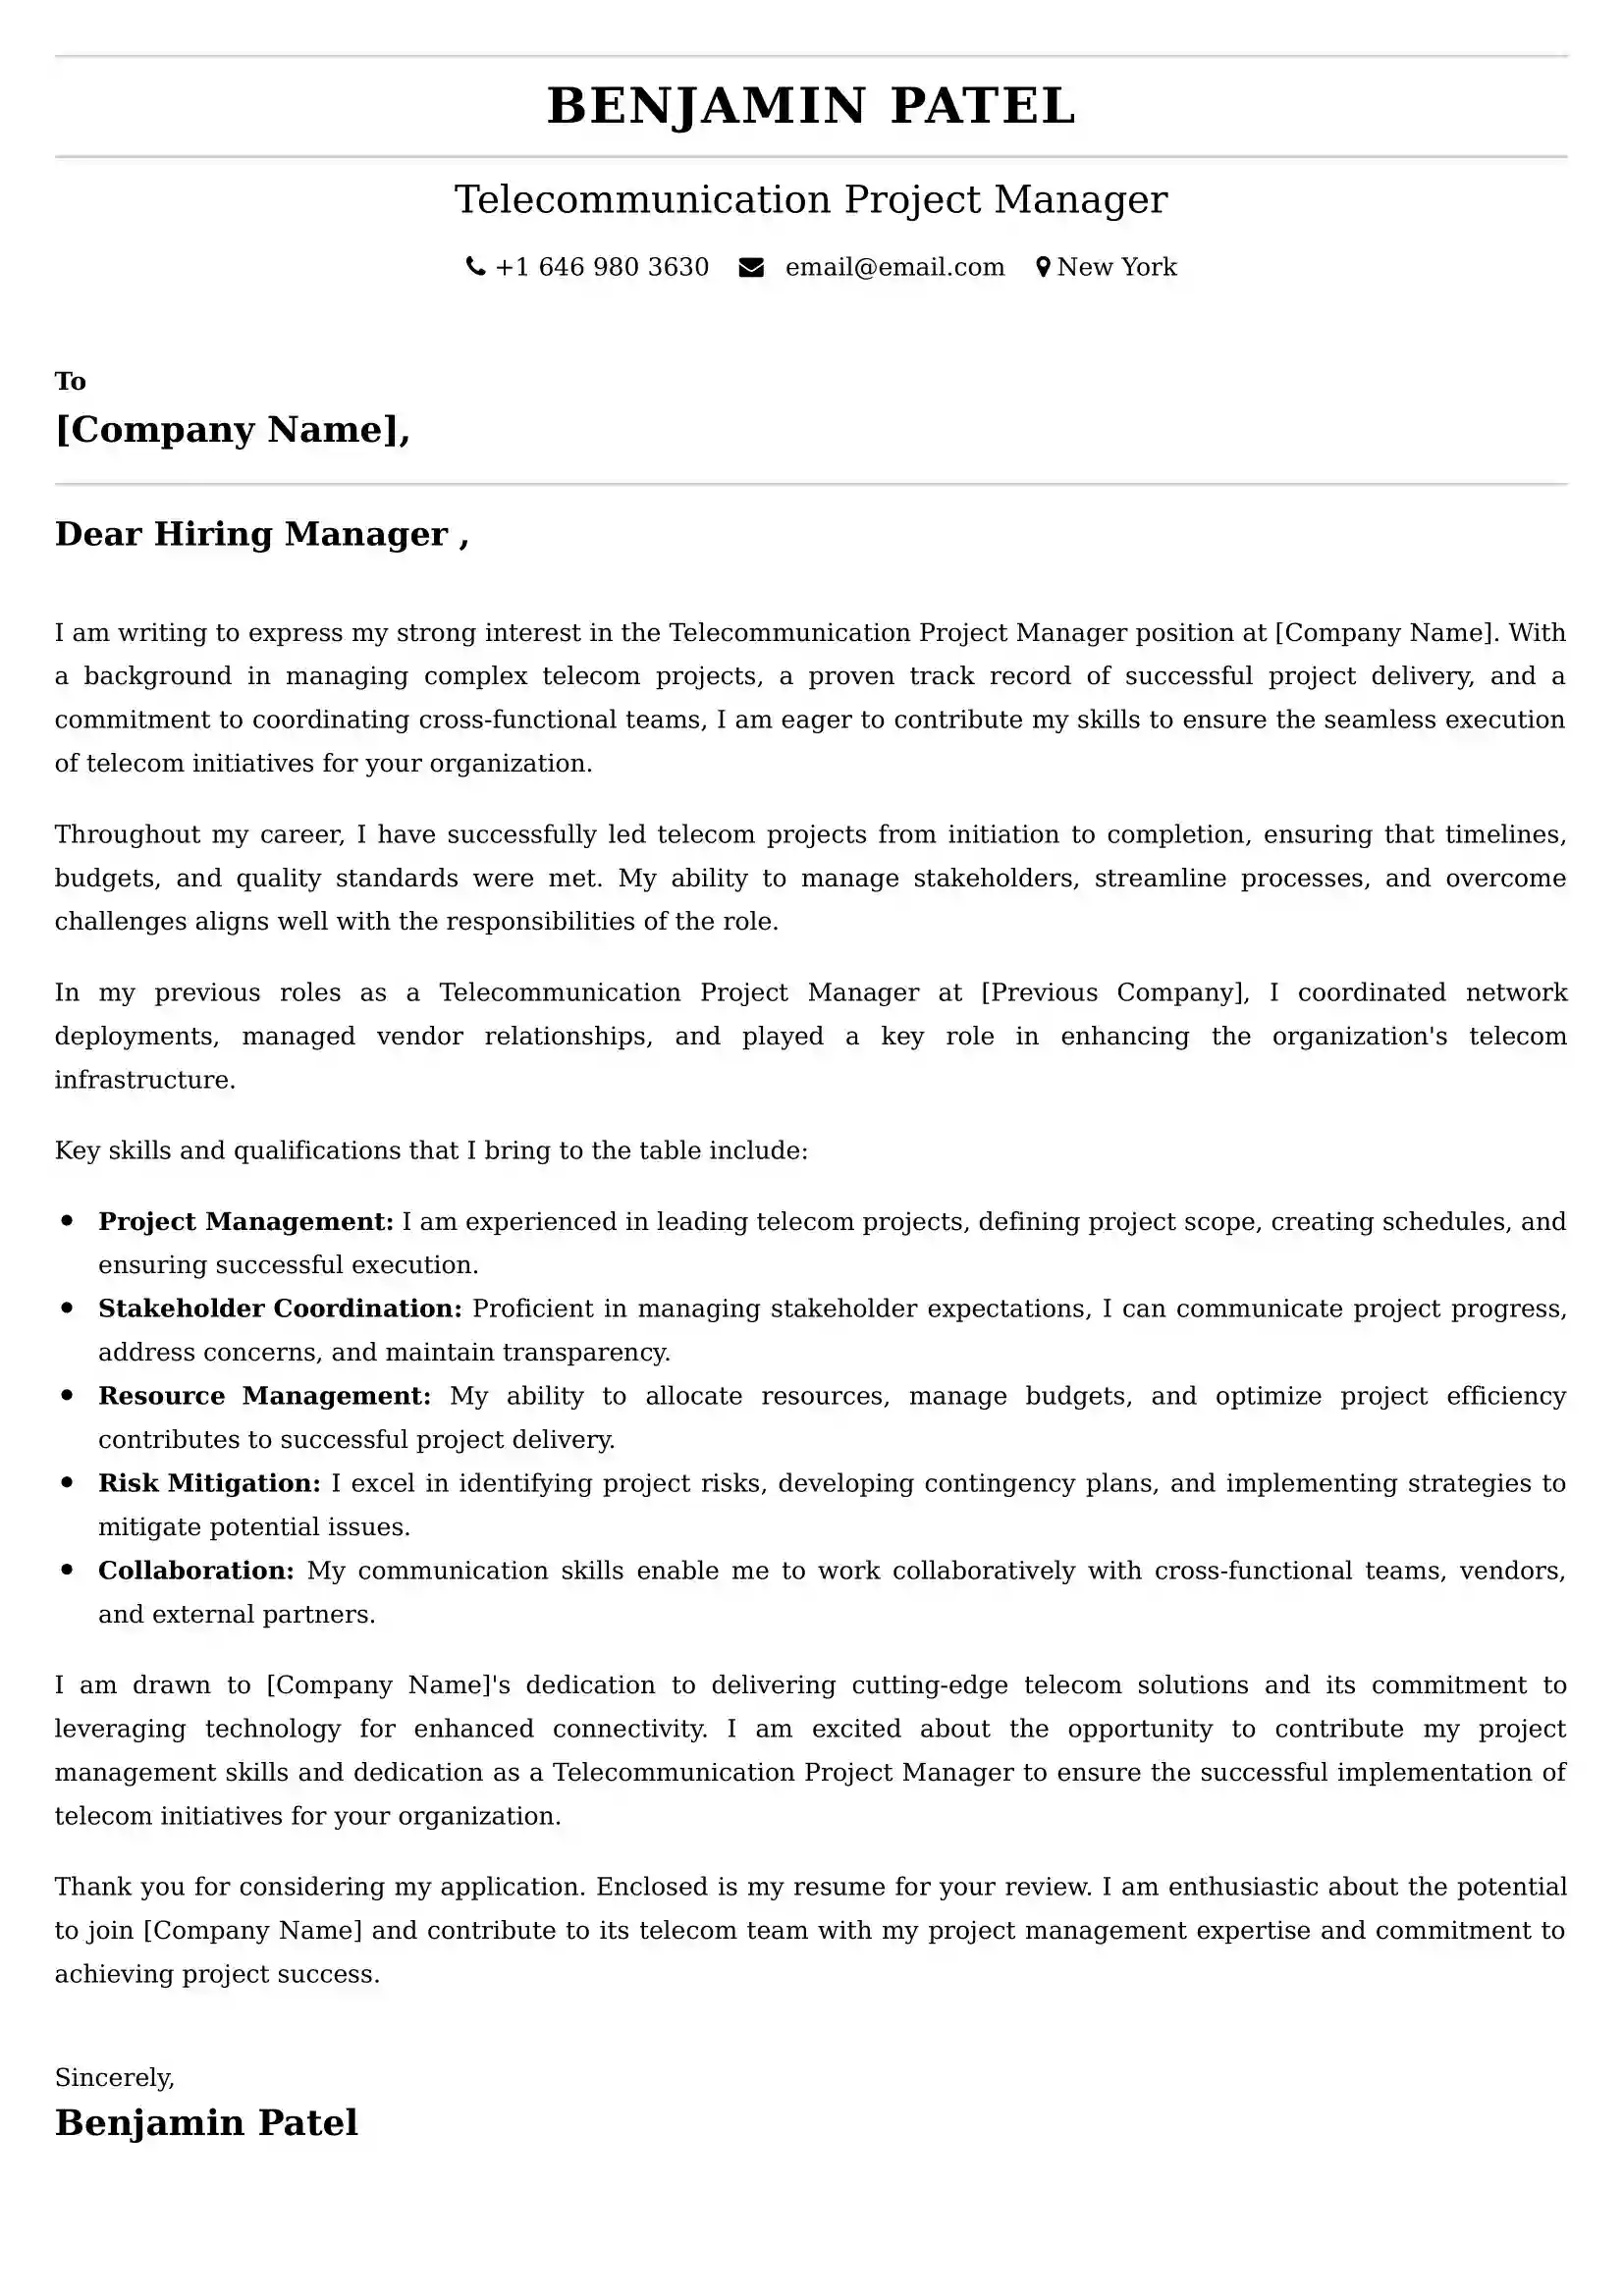 Telecommunication Project Manager Cover Letter Samples Malaysia